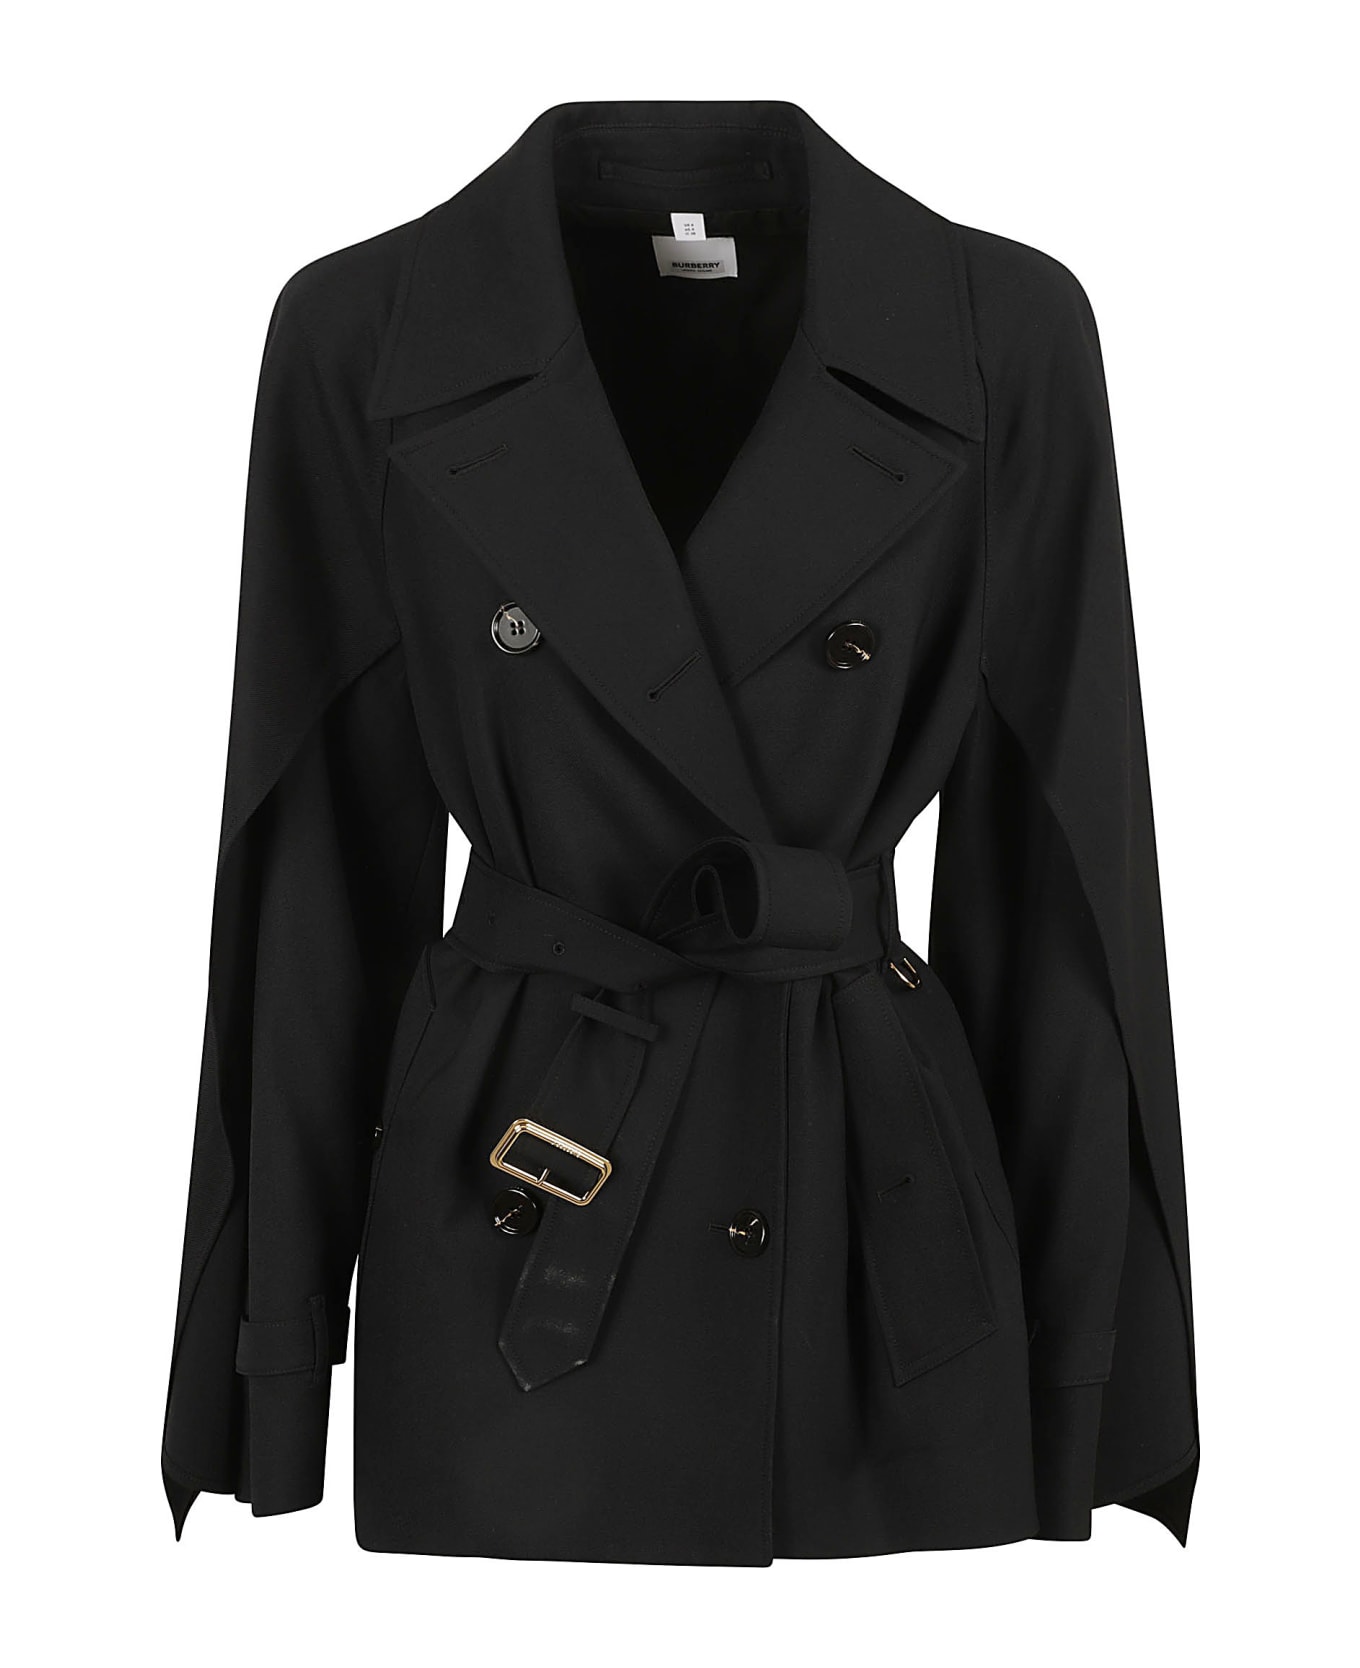 Burberry Belted Double-breasted Jacket - Black